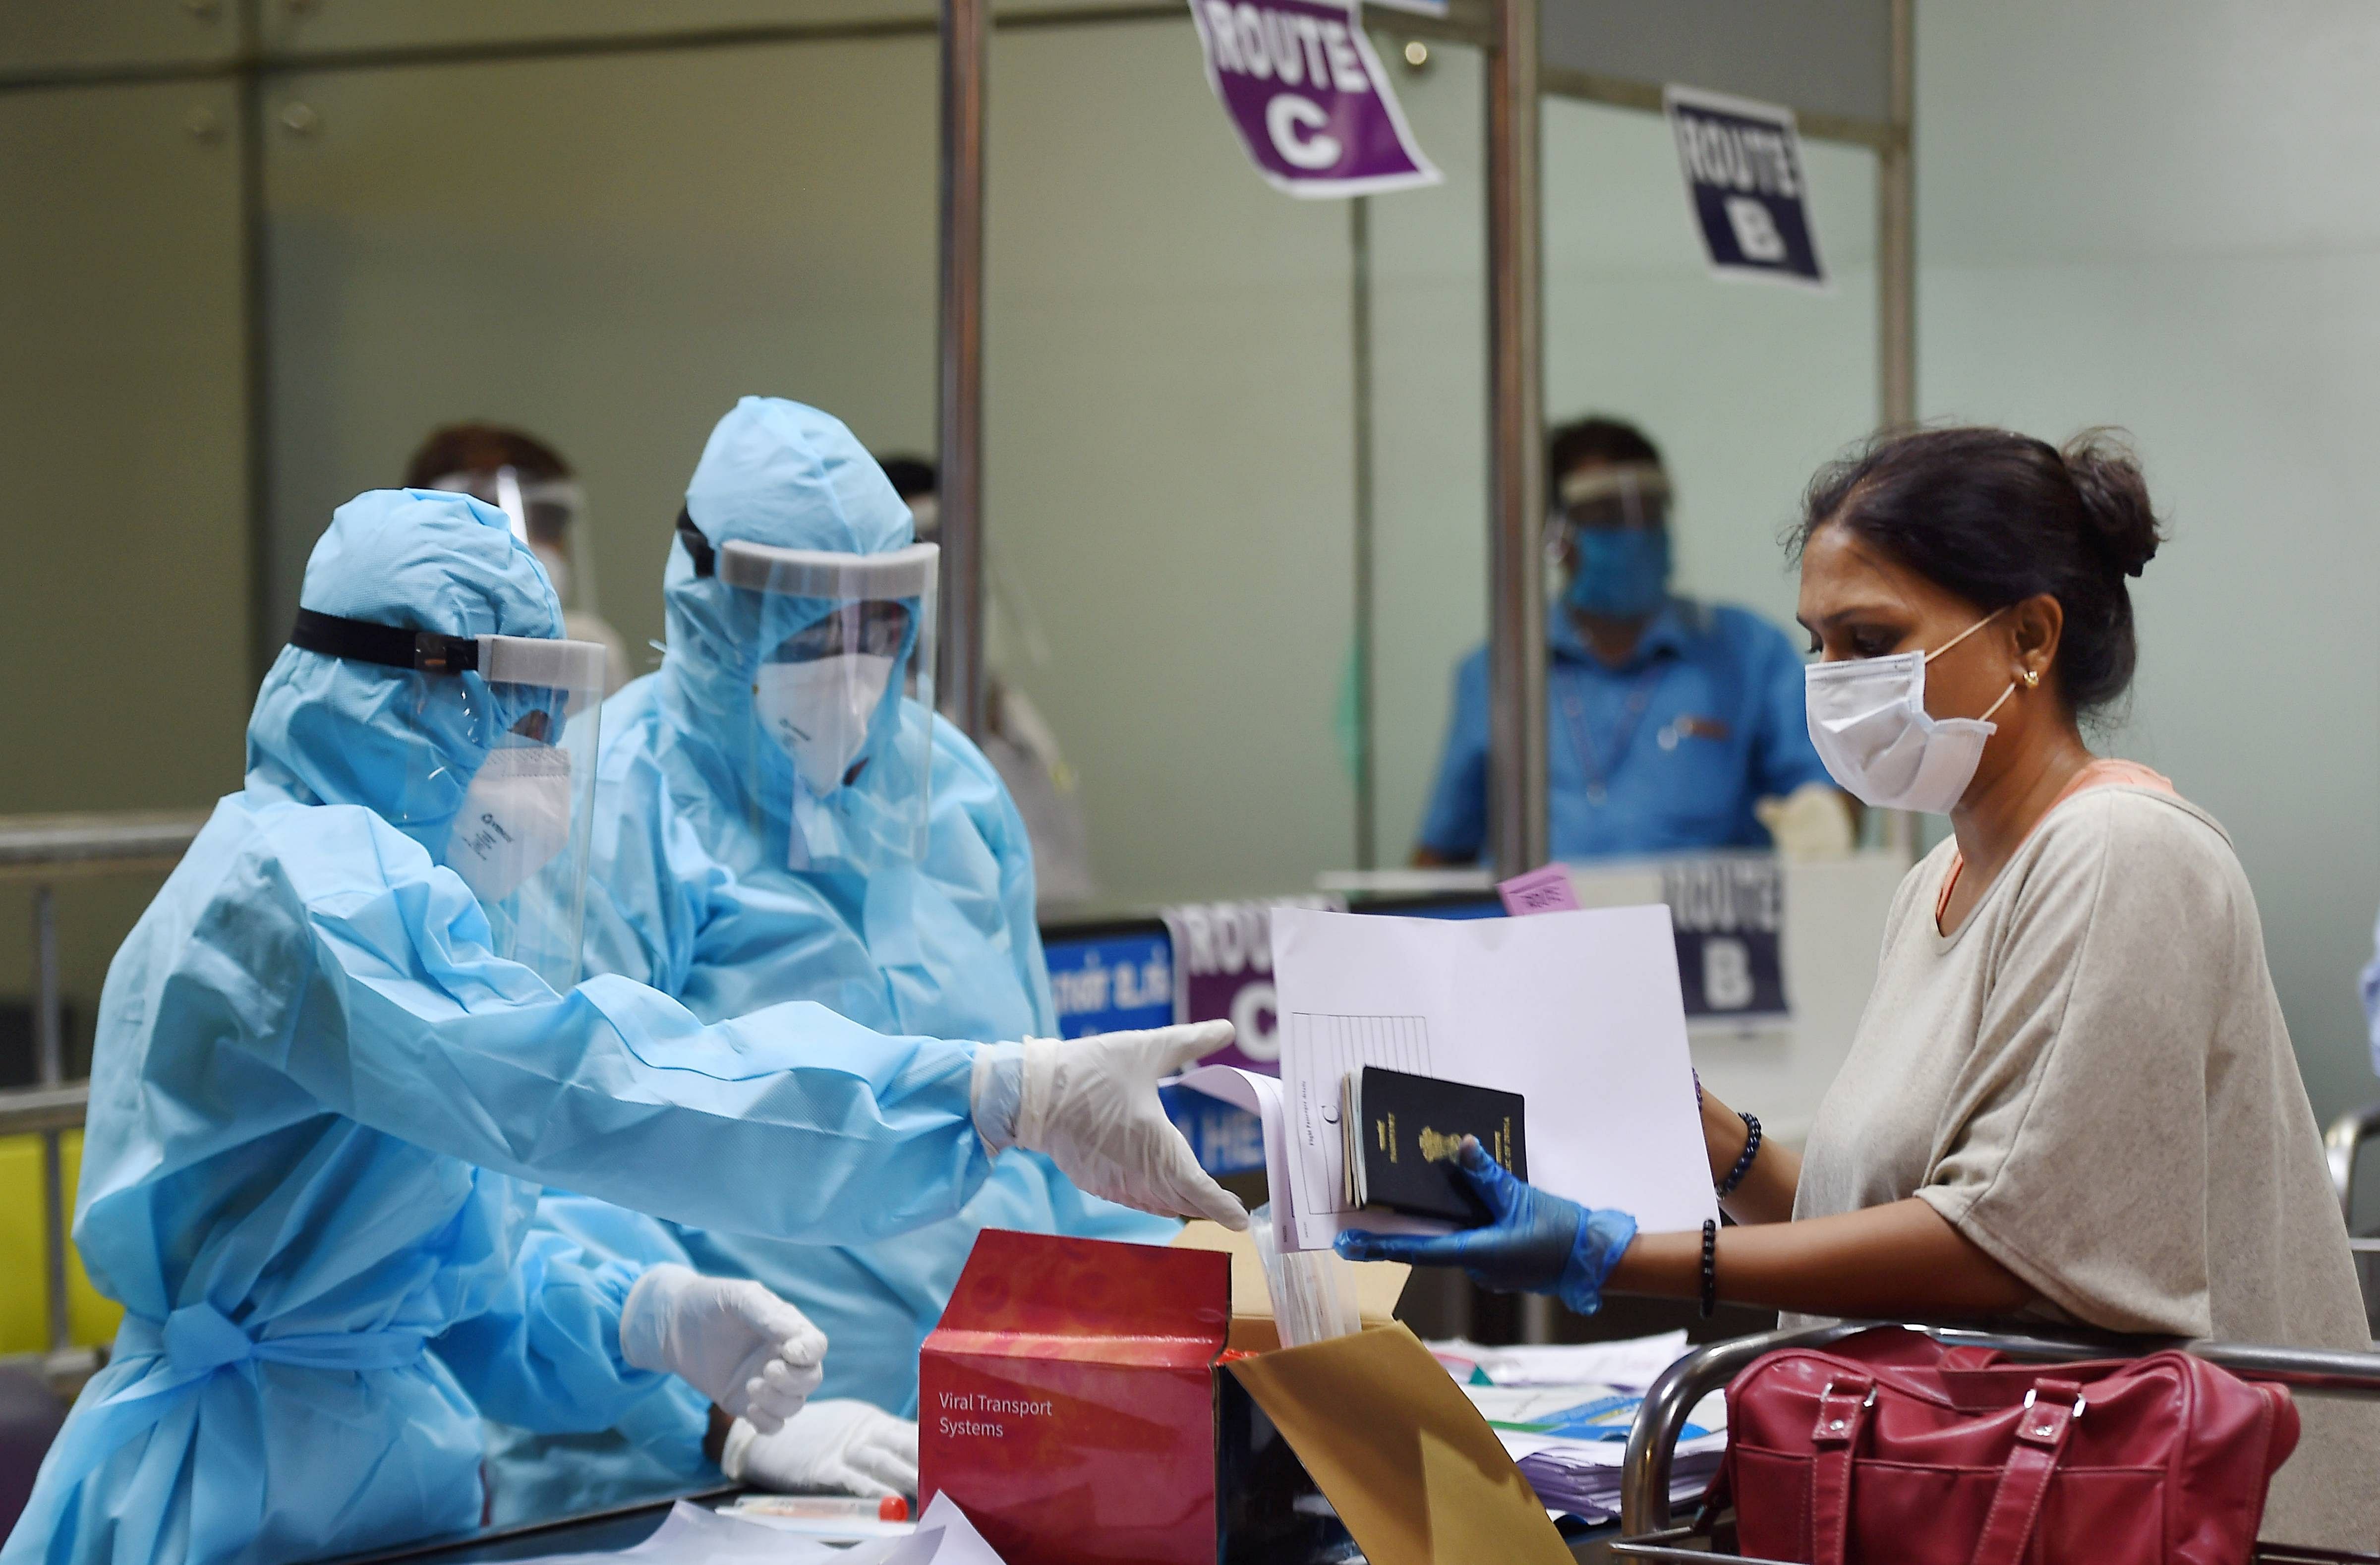 The government had launched the 'Vande Bharat Mission' on May 7 to repatriate Indians from different parts of the world who were stranded due to the COVID-19 pandemic. (Credit: PTI Photo)